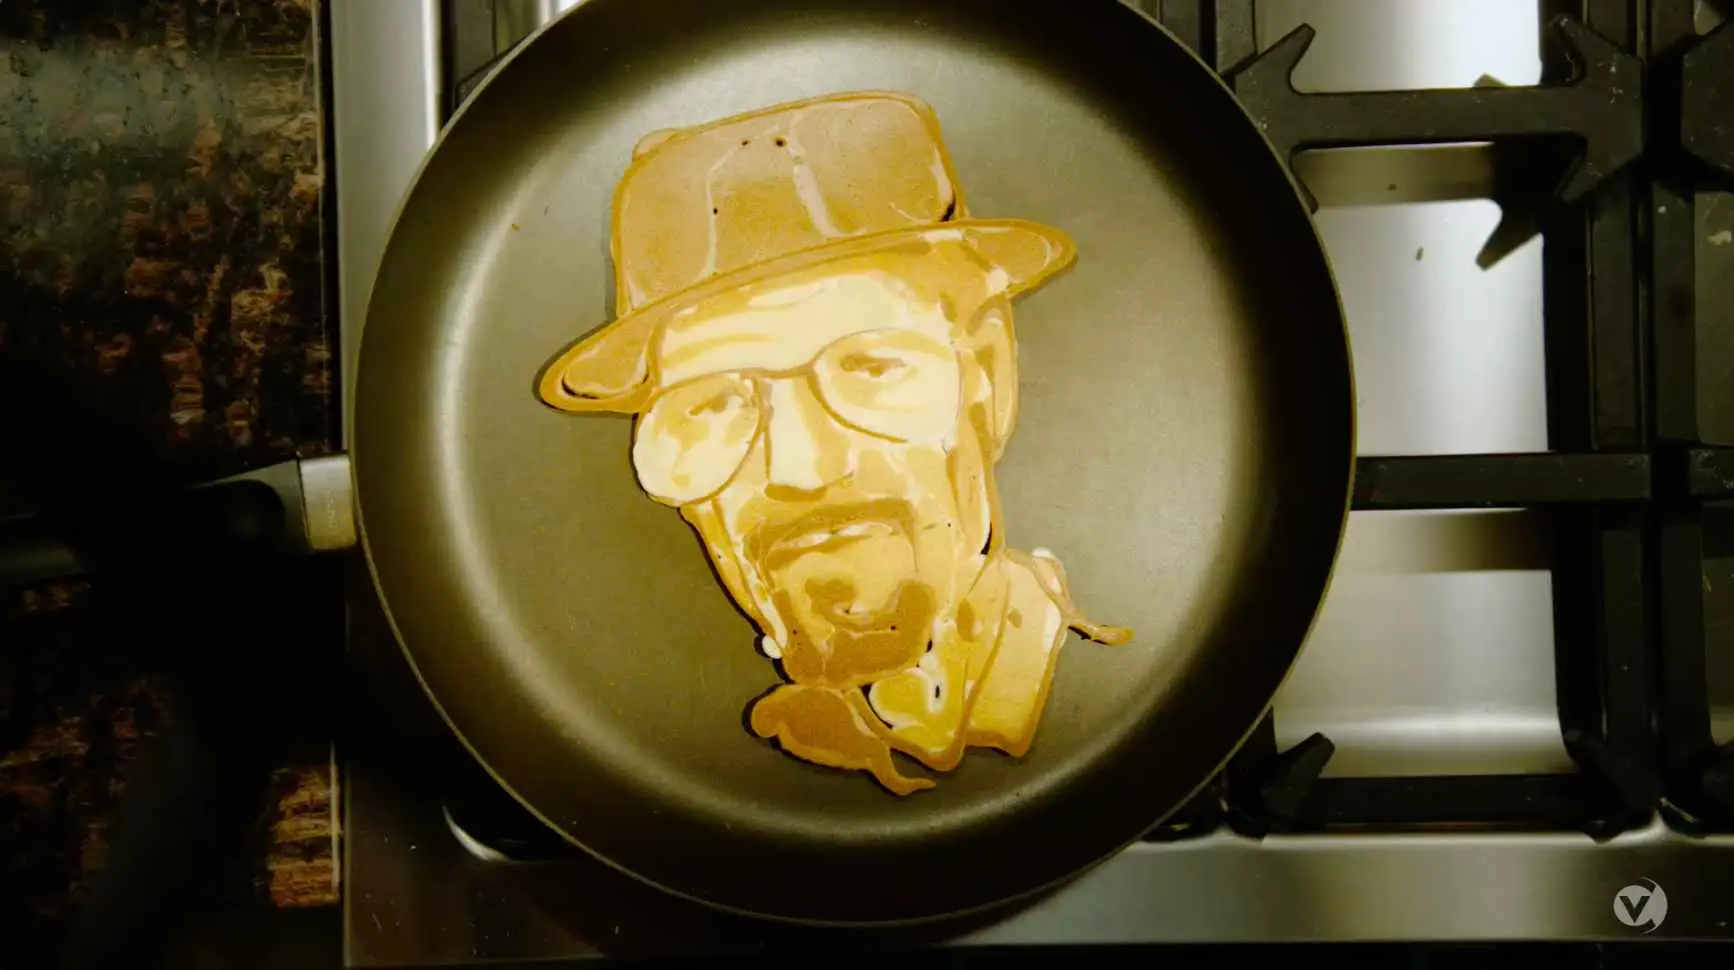 A pancake with a detailed portrait design cooking in a frying pan, ready to be added to your Sales Content Library.